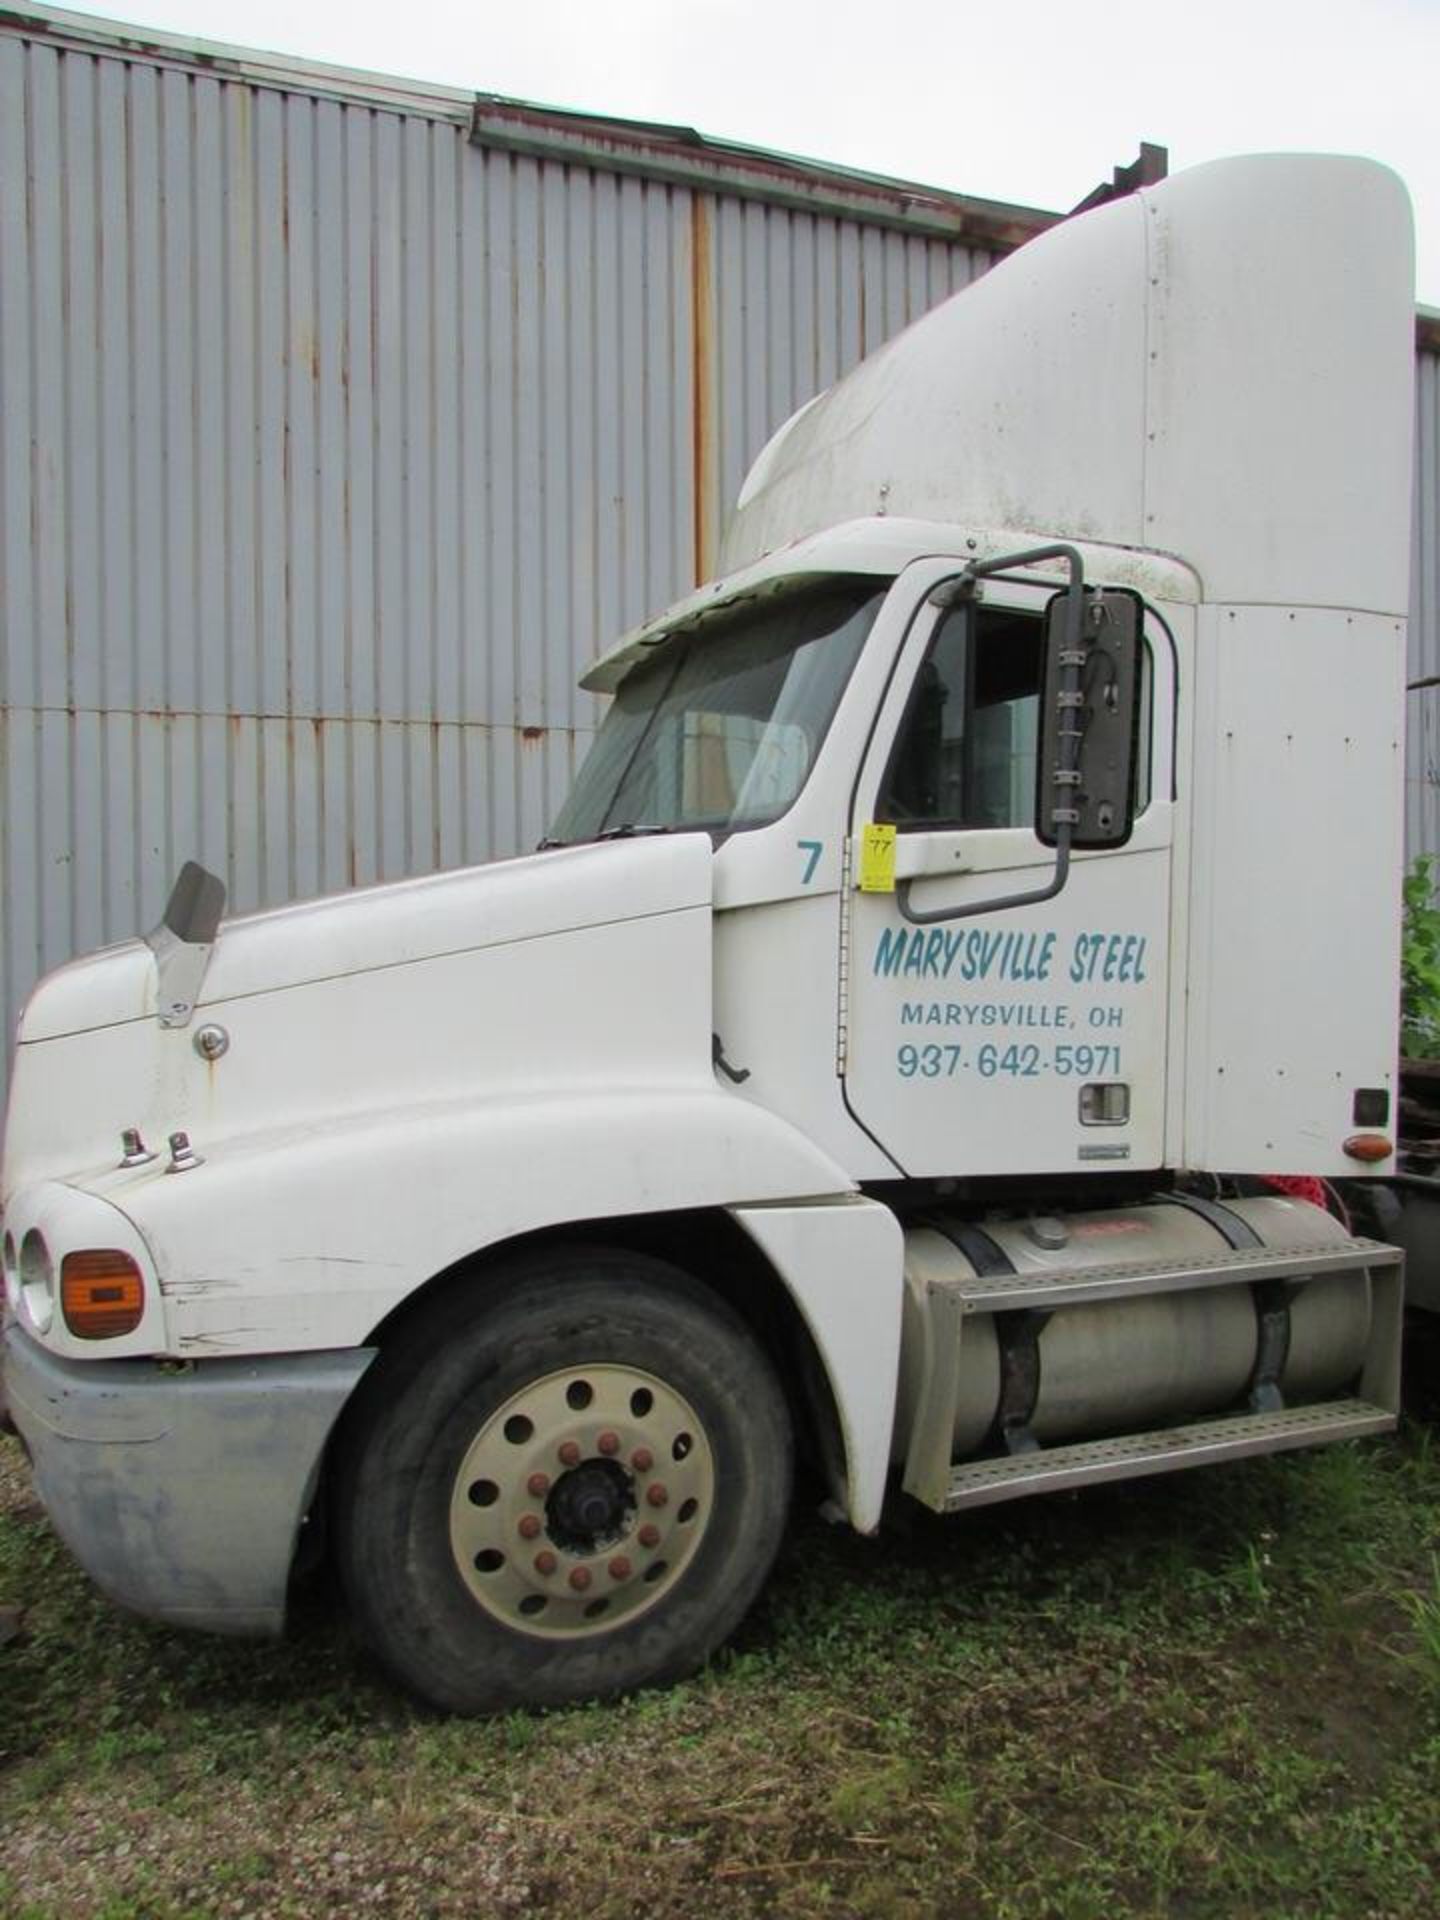 2002 Freightliner Century Class Day Cab Truck Tractor, 52,000 GVWR, Eaton Fuller 10-Speed Manual - Image 4 of 20